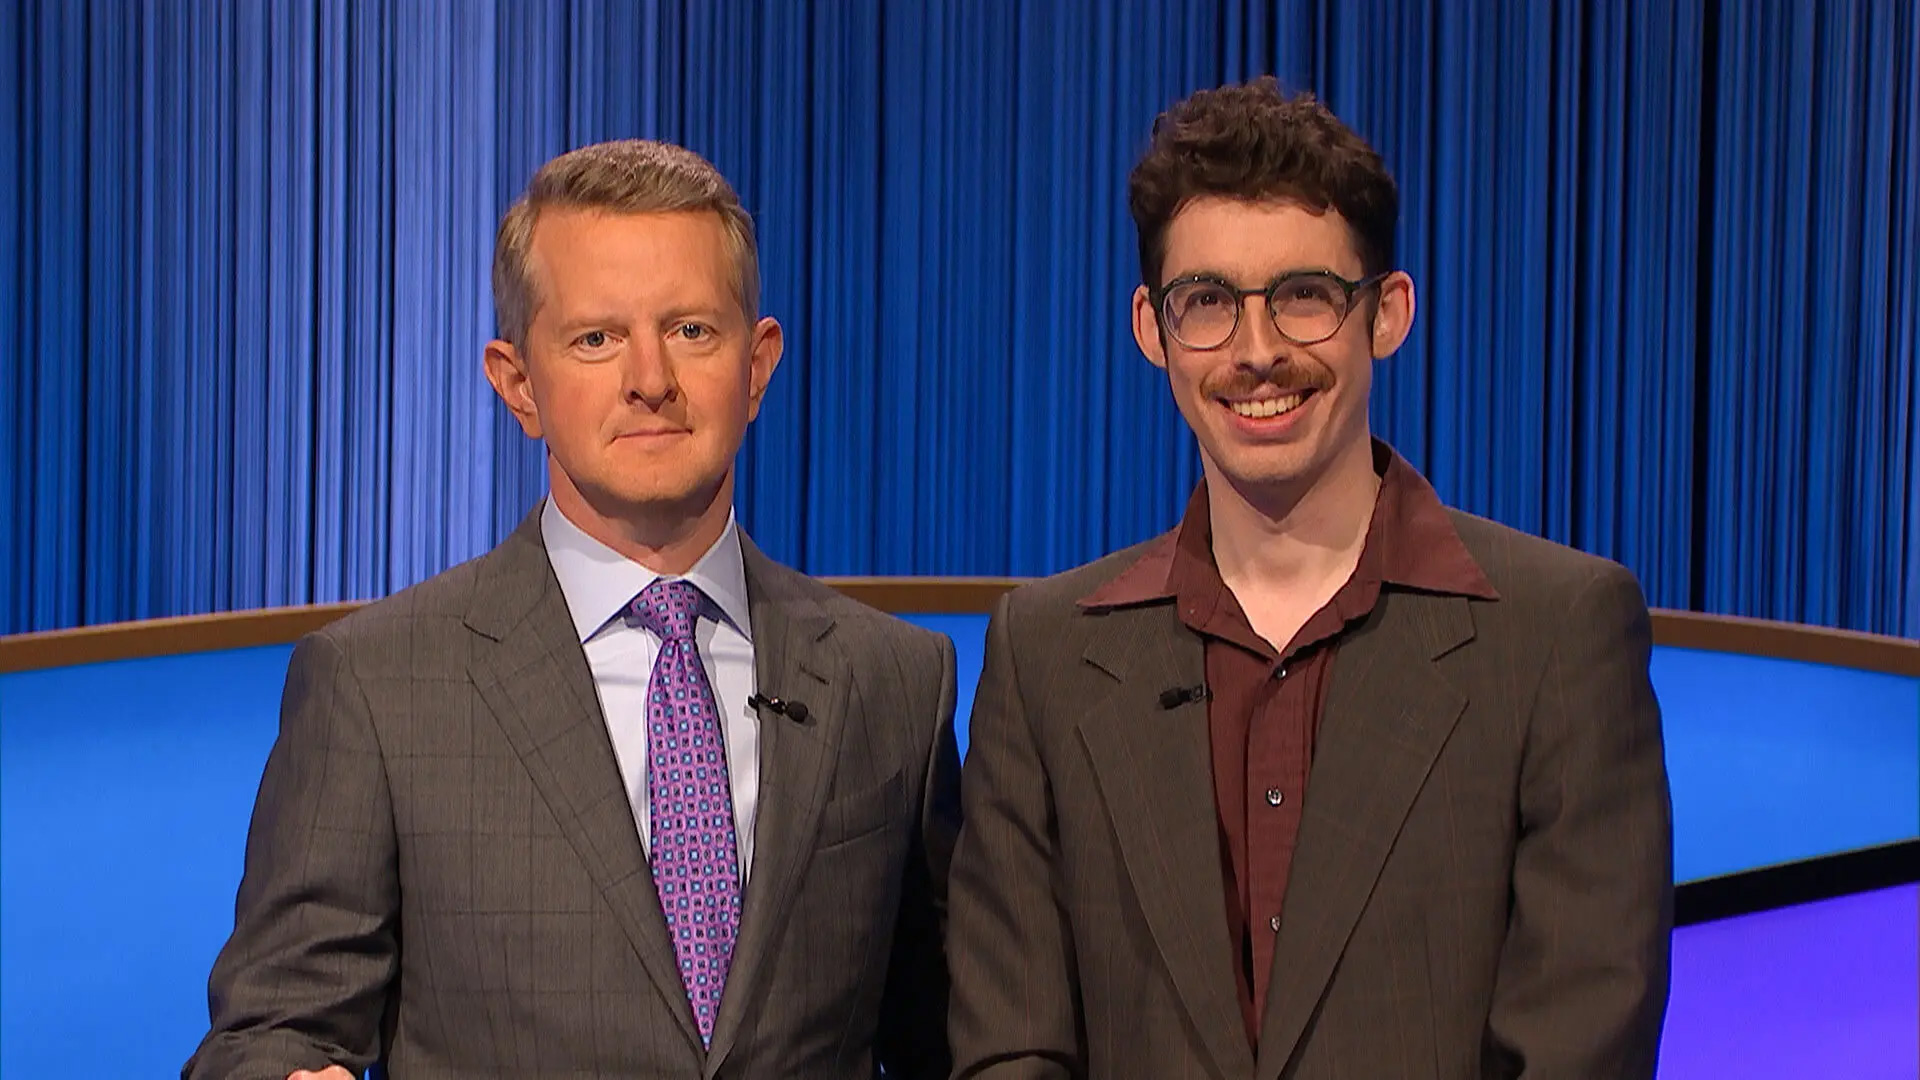 Isaac Hirsch '14, right, with "Jeopardy!" host Ken Jennings during his winning streak. The UMD history grad credits, in part, his UMD Quiz Bowl and standup experiences with his successful run—and is looking forward to coming back during the next Tournament of Champions.